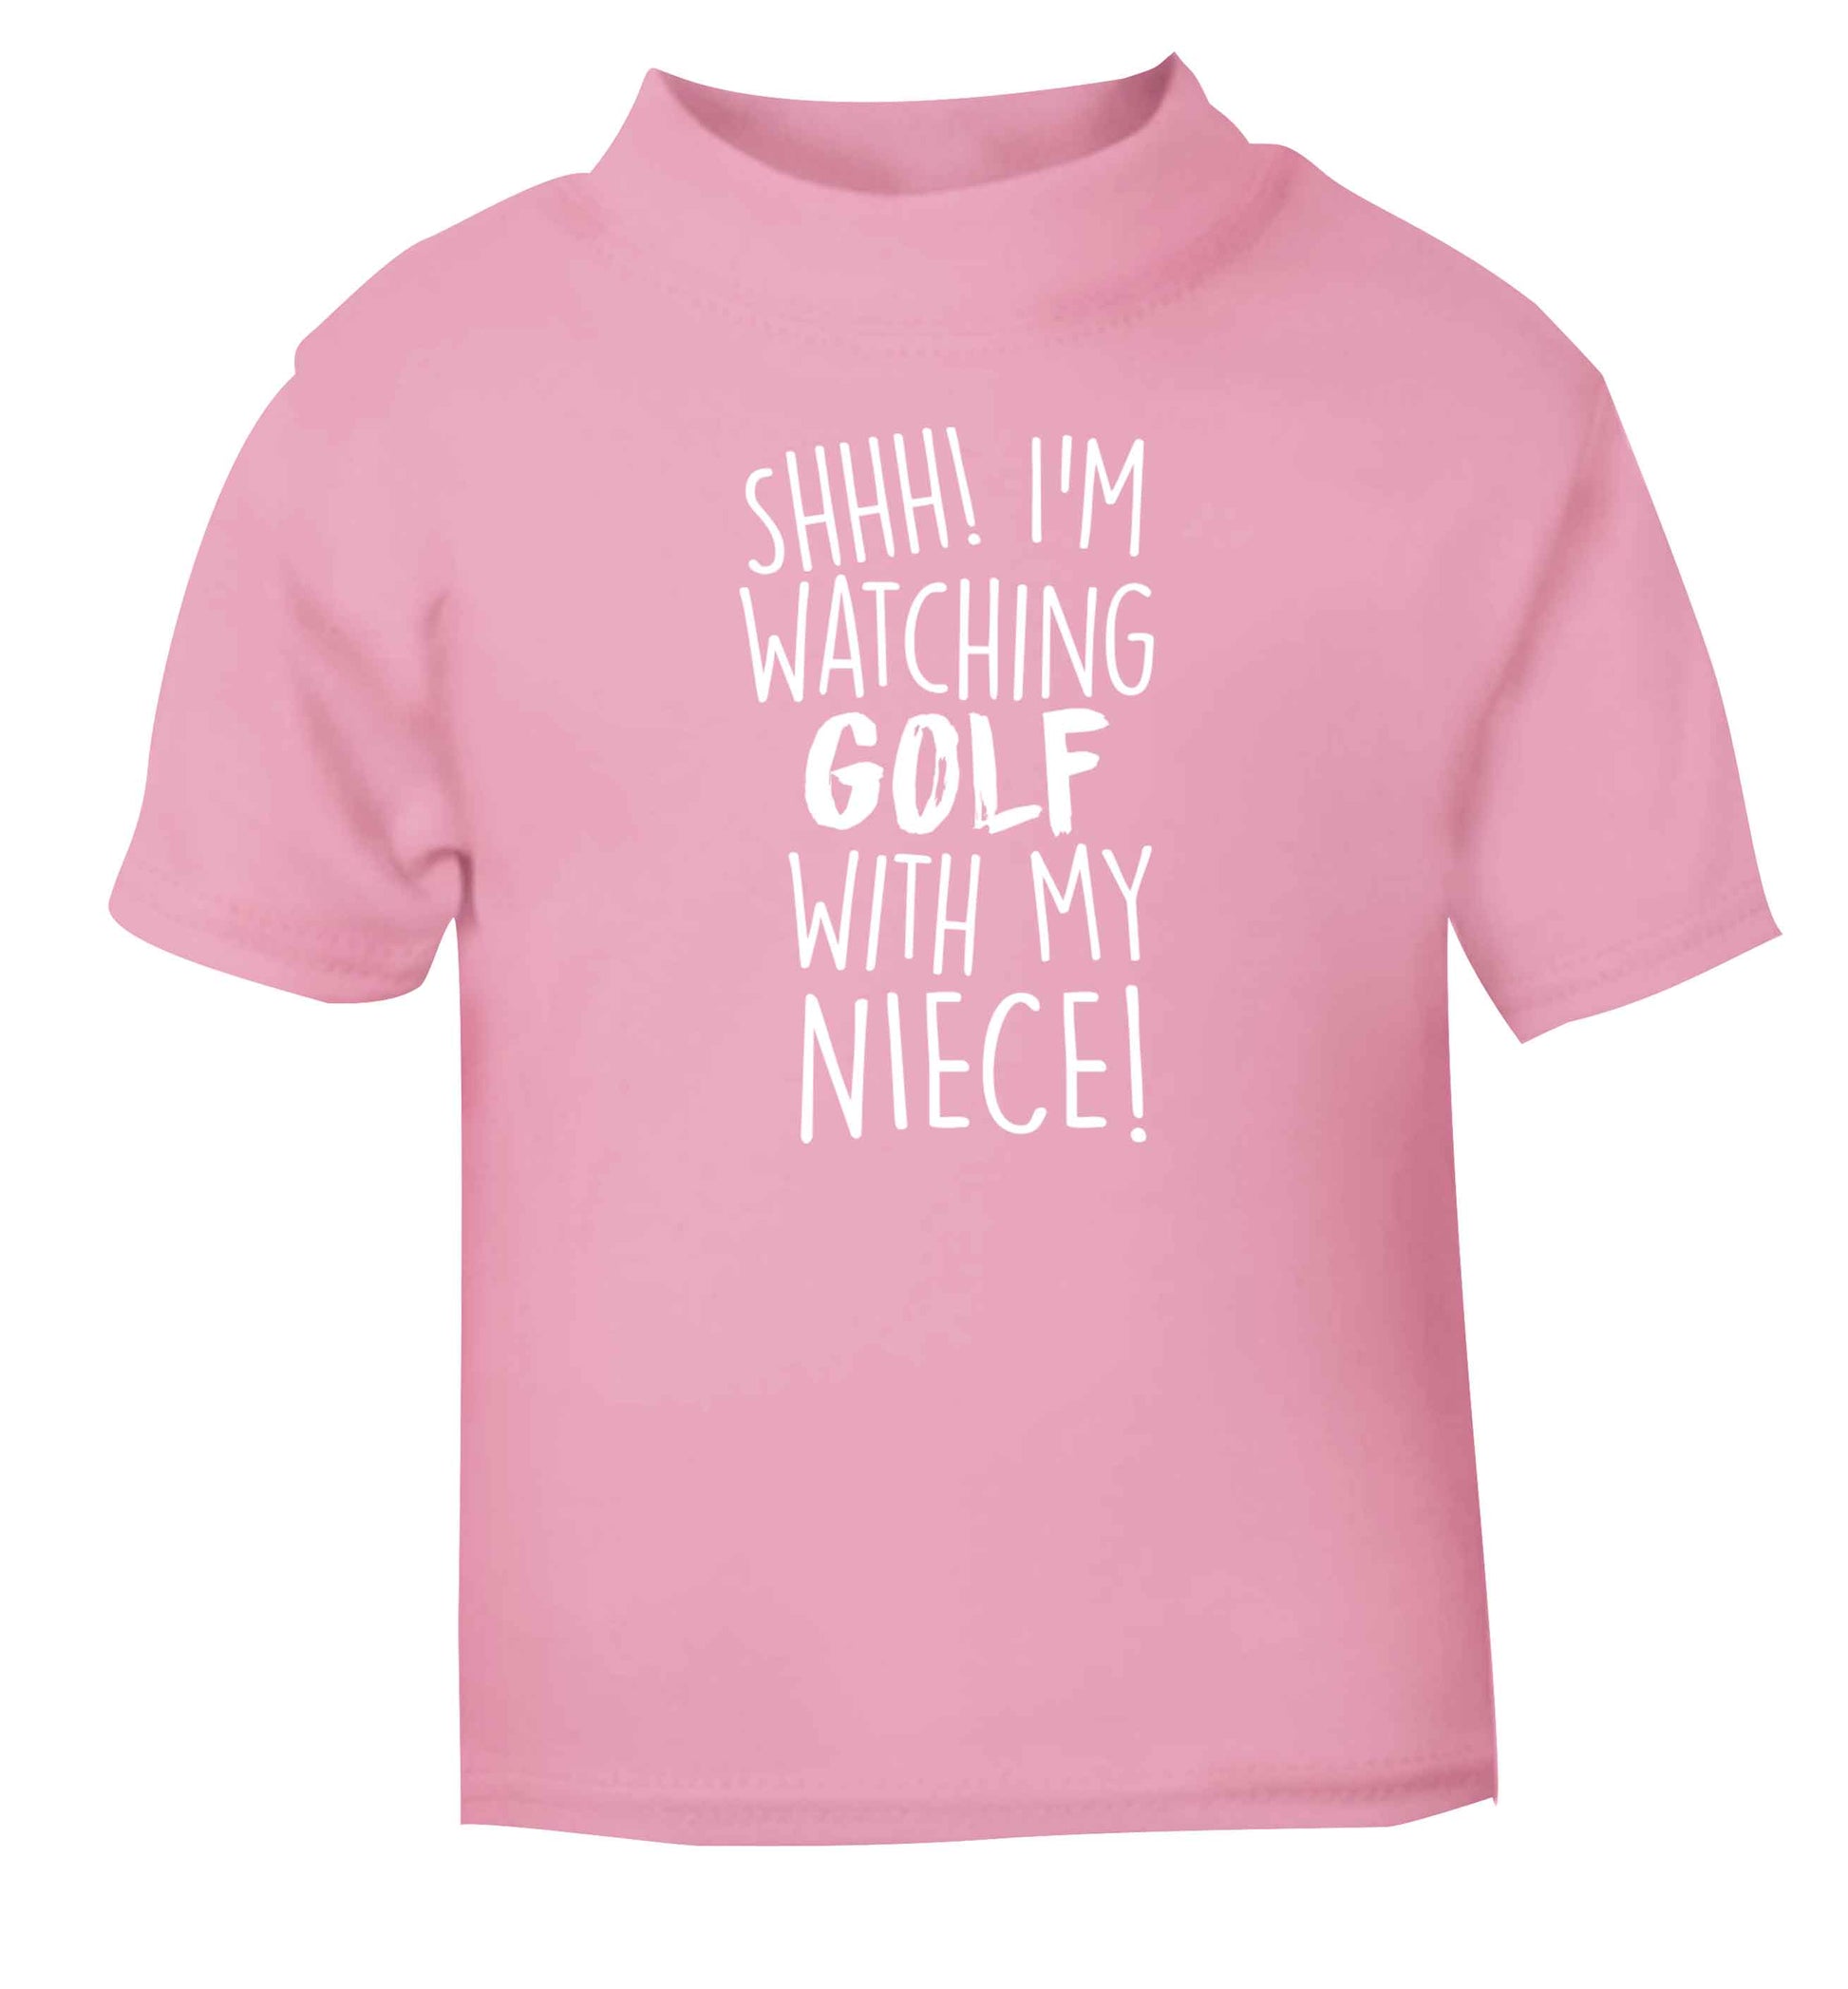 Shh I'm watching golf with my niece light pink Baby Toddler Tshirt 2 Years